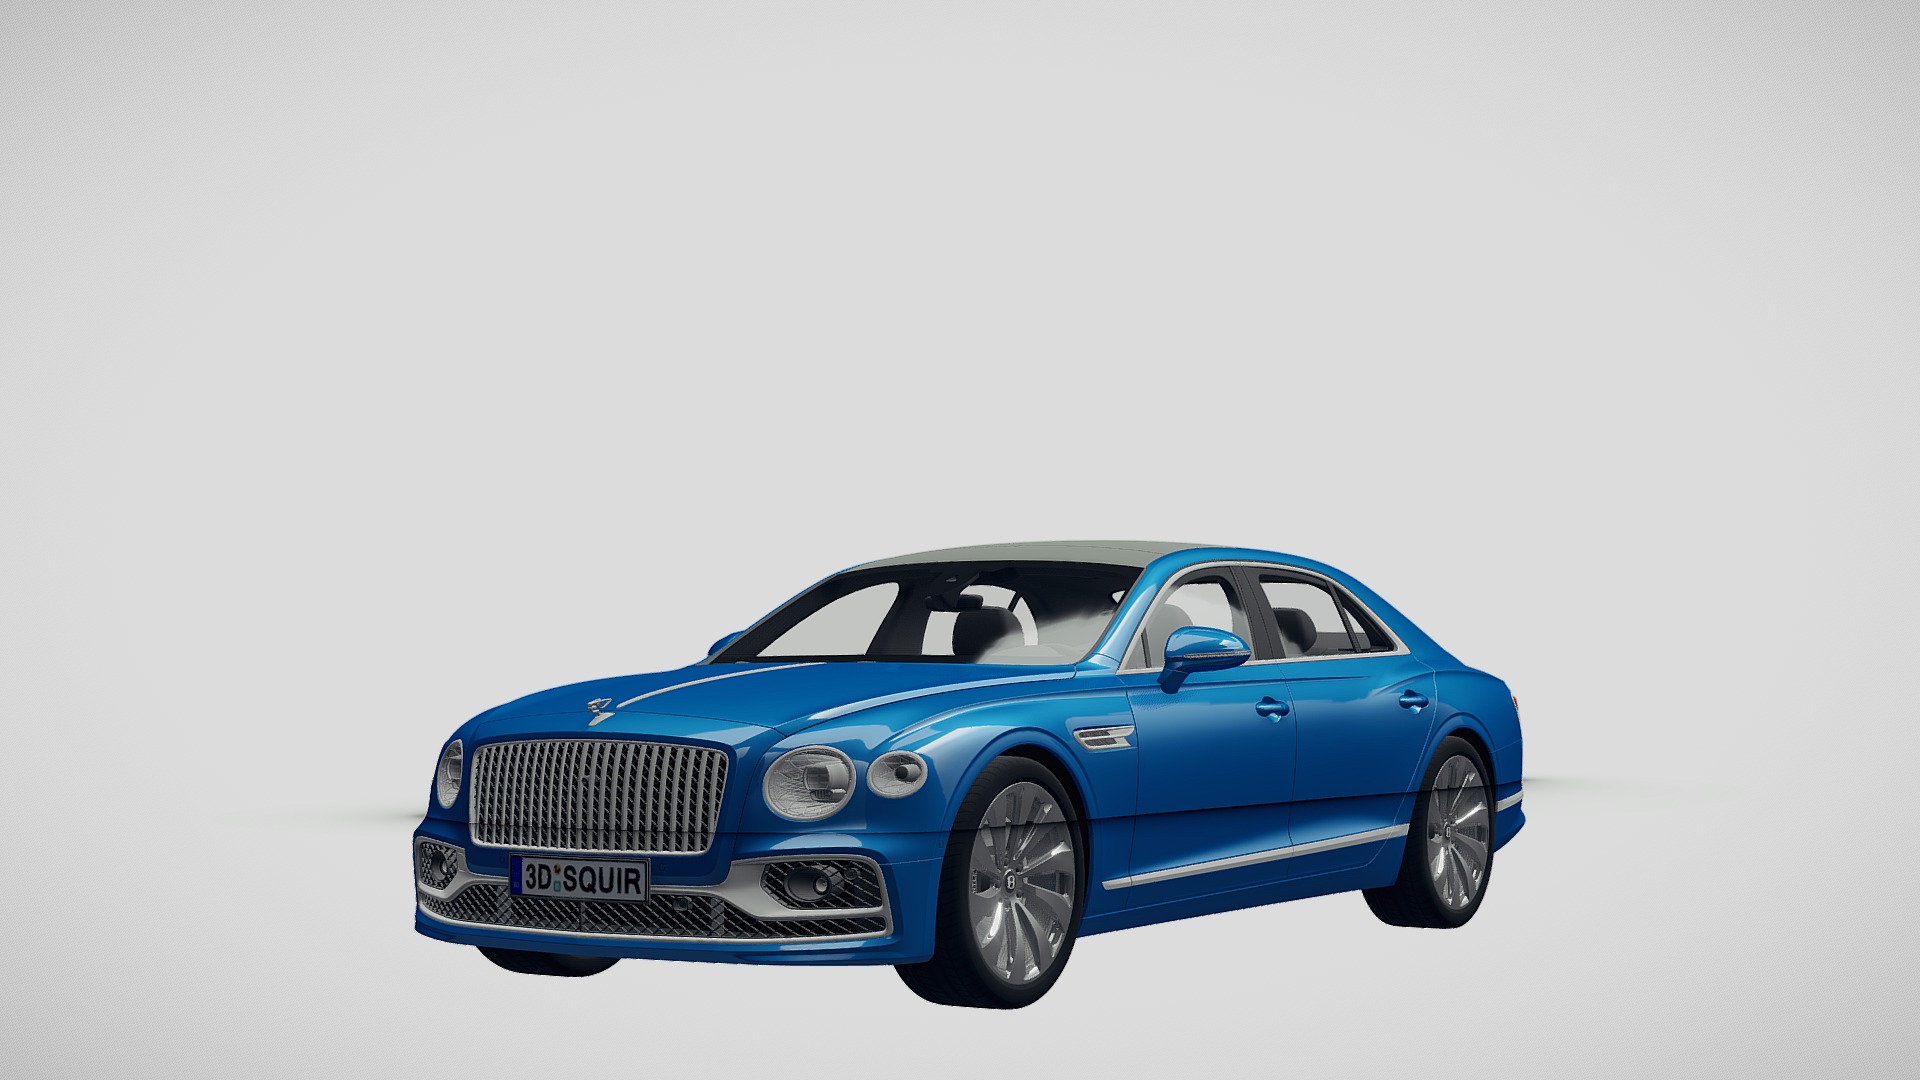 3D model Bentley Flying Spur 2020 - This is a 3D model of the Bentley Flying Spur 2020. The 3D model is about a blue car with a person in it.